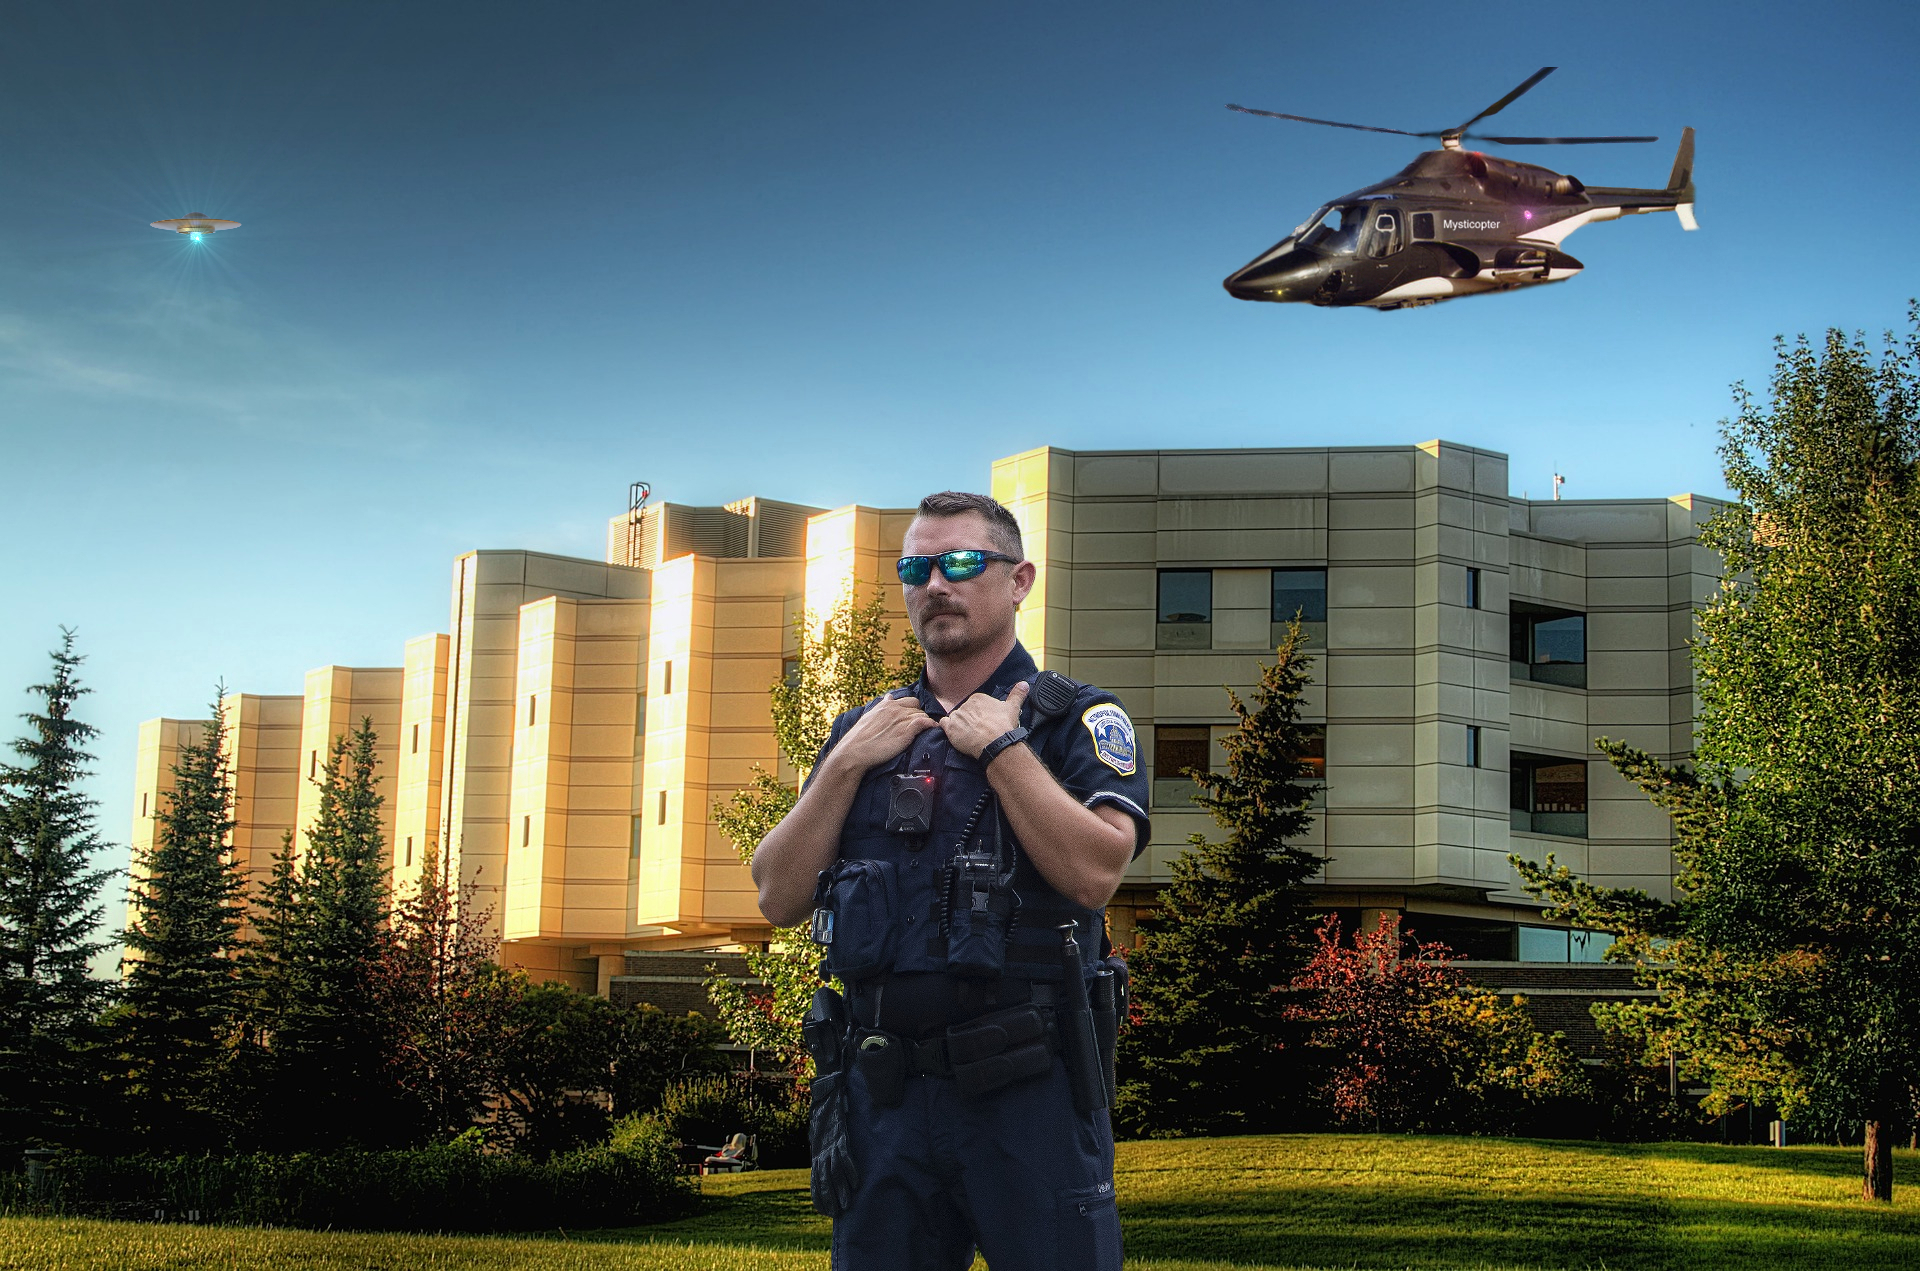 Police Officer about to exhibit the symptoms of roid rage as the Mysticopter lands at the hospital with a family in need of medical care.